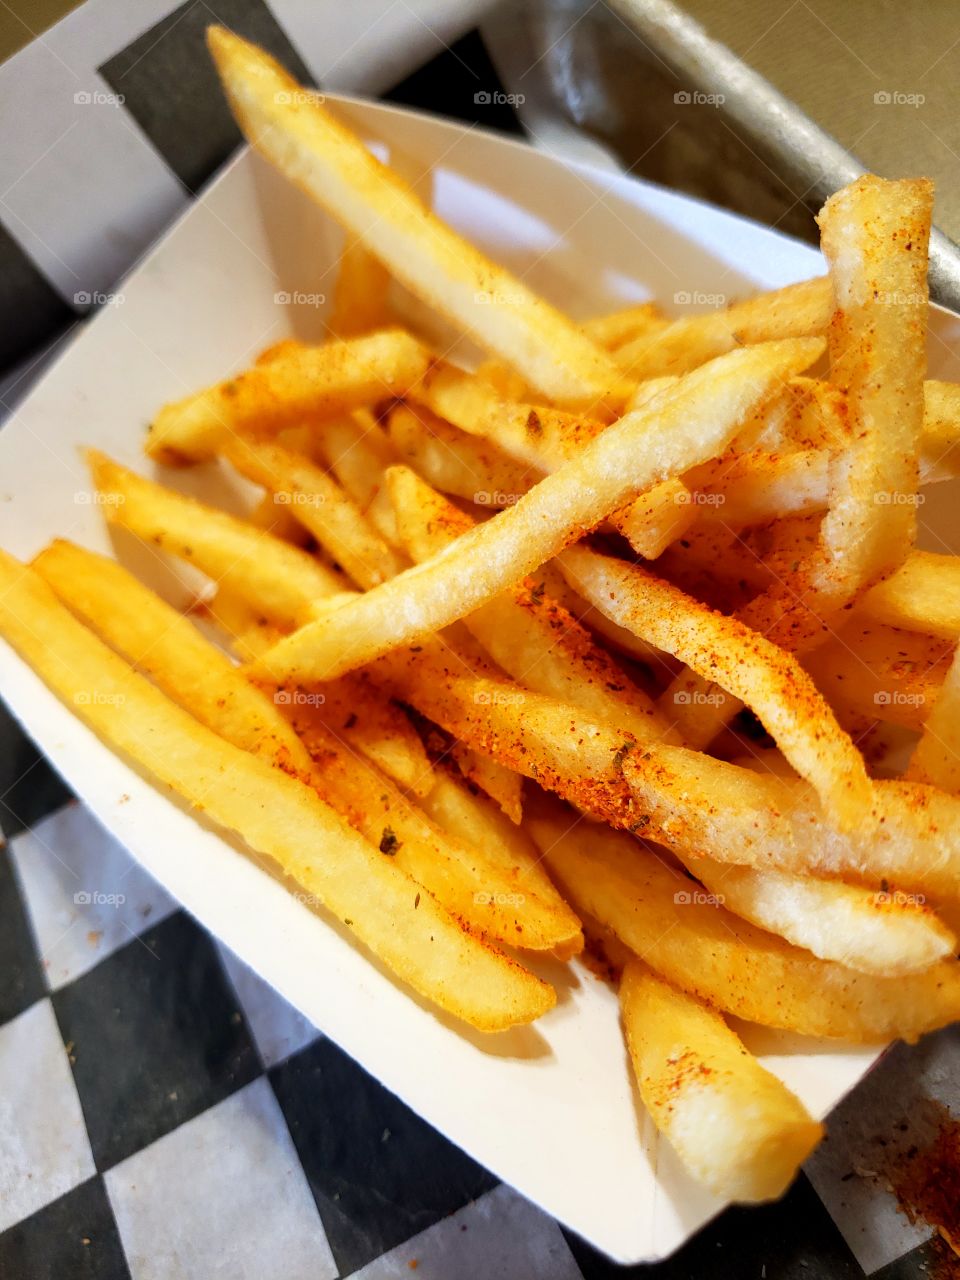 fries at a local restaurant